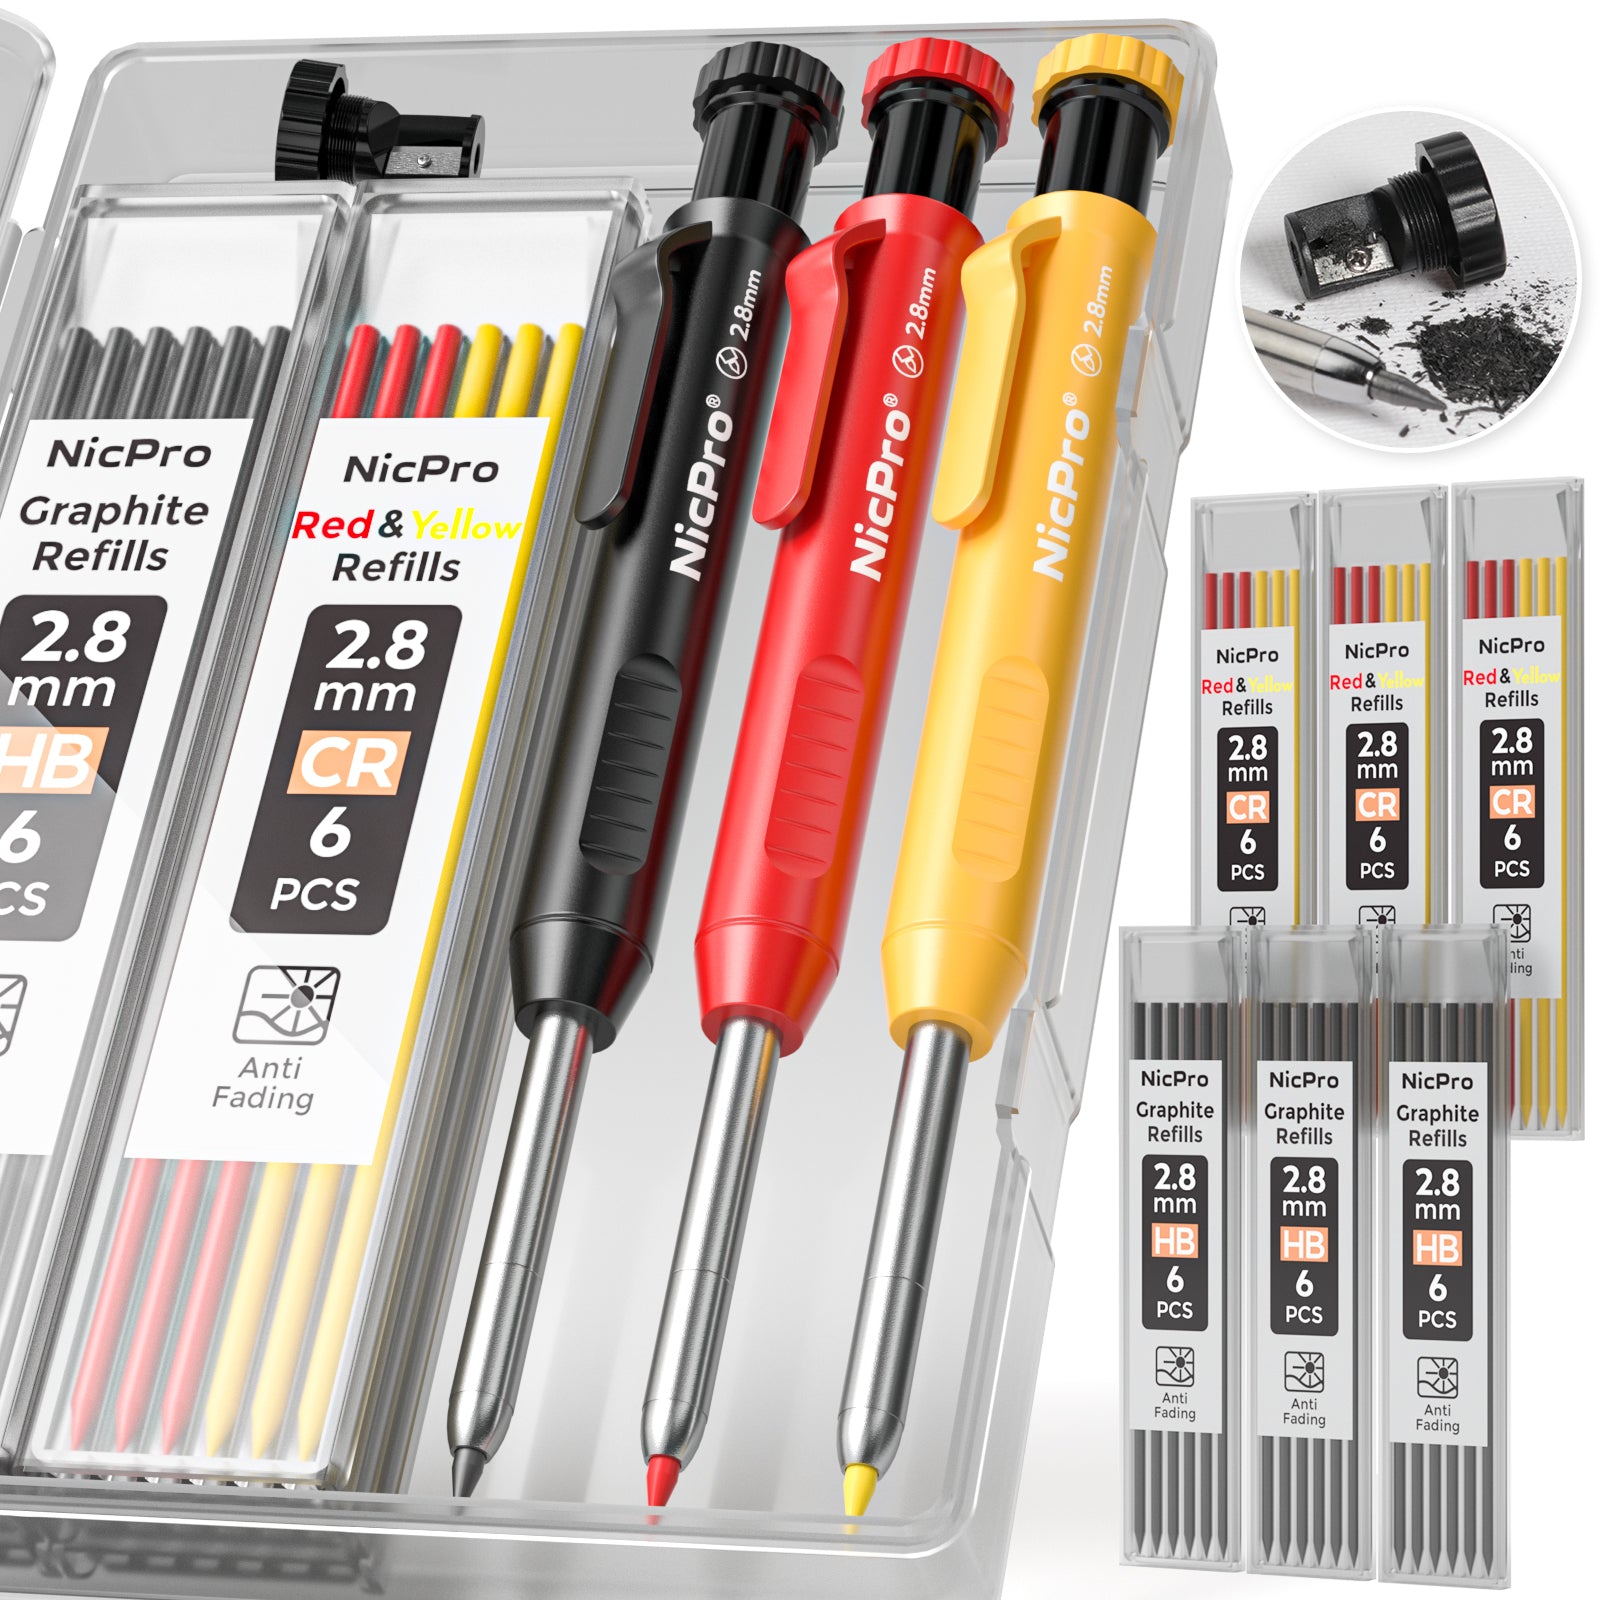 Starbond Carpenter Mechanical Pencil - Includes 12 Wax Refill Leads + Built-In Sharpener Red Pencil